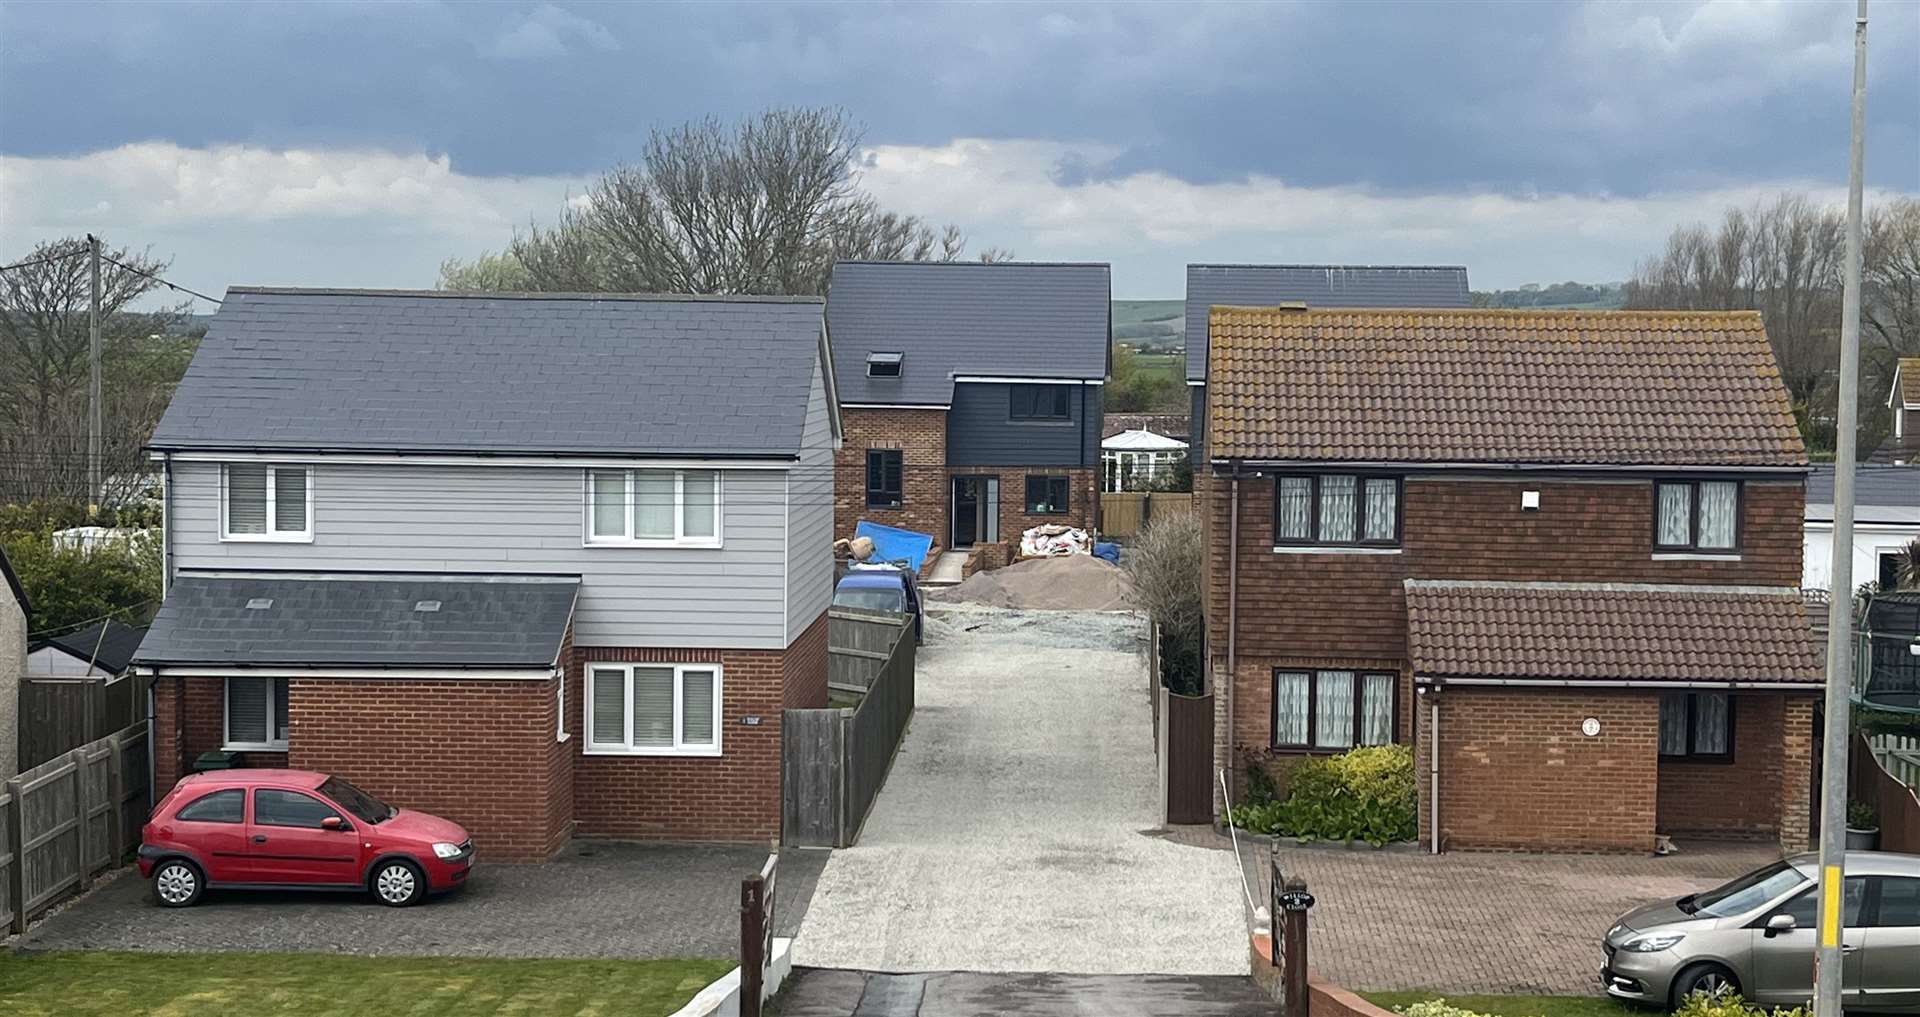 The two new homes - seen here behind the street-facing properties - have been built on land to the rear of Willop Close in Dymchurch